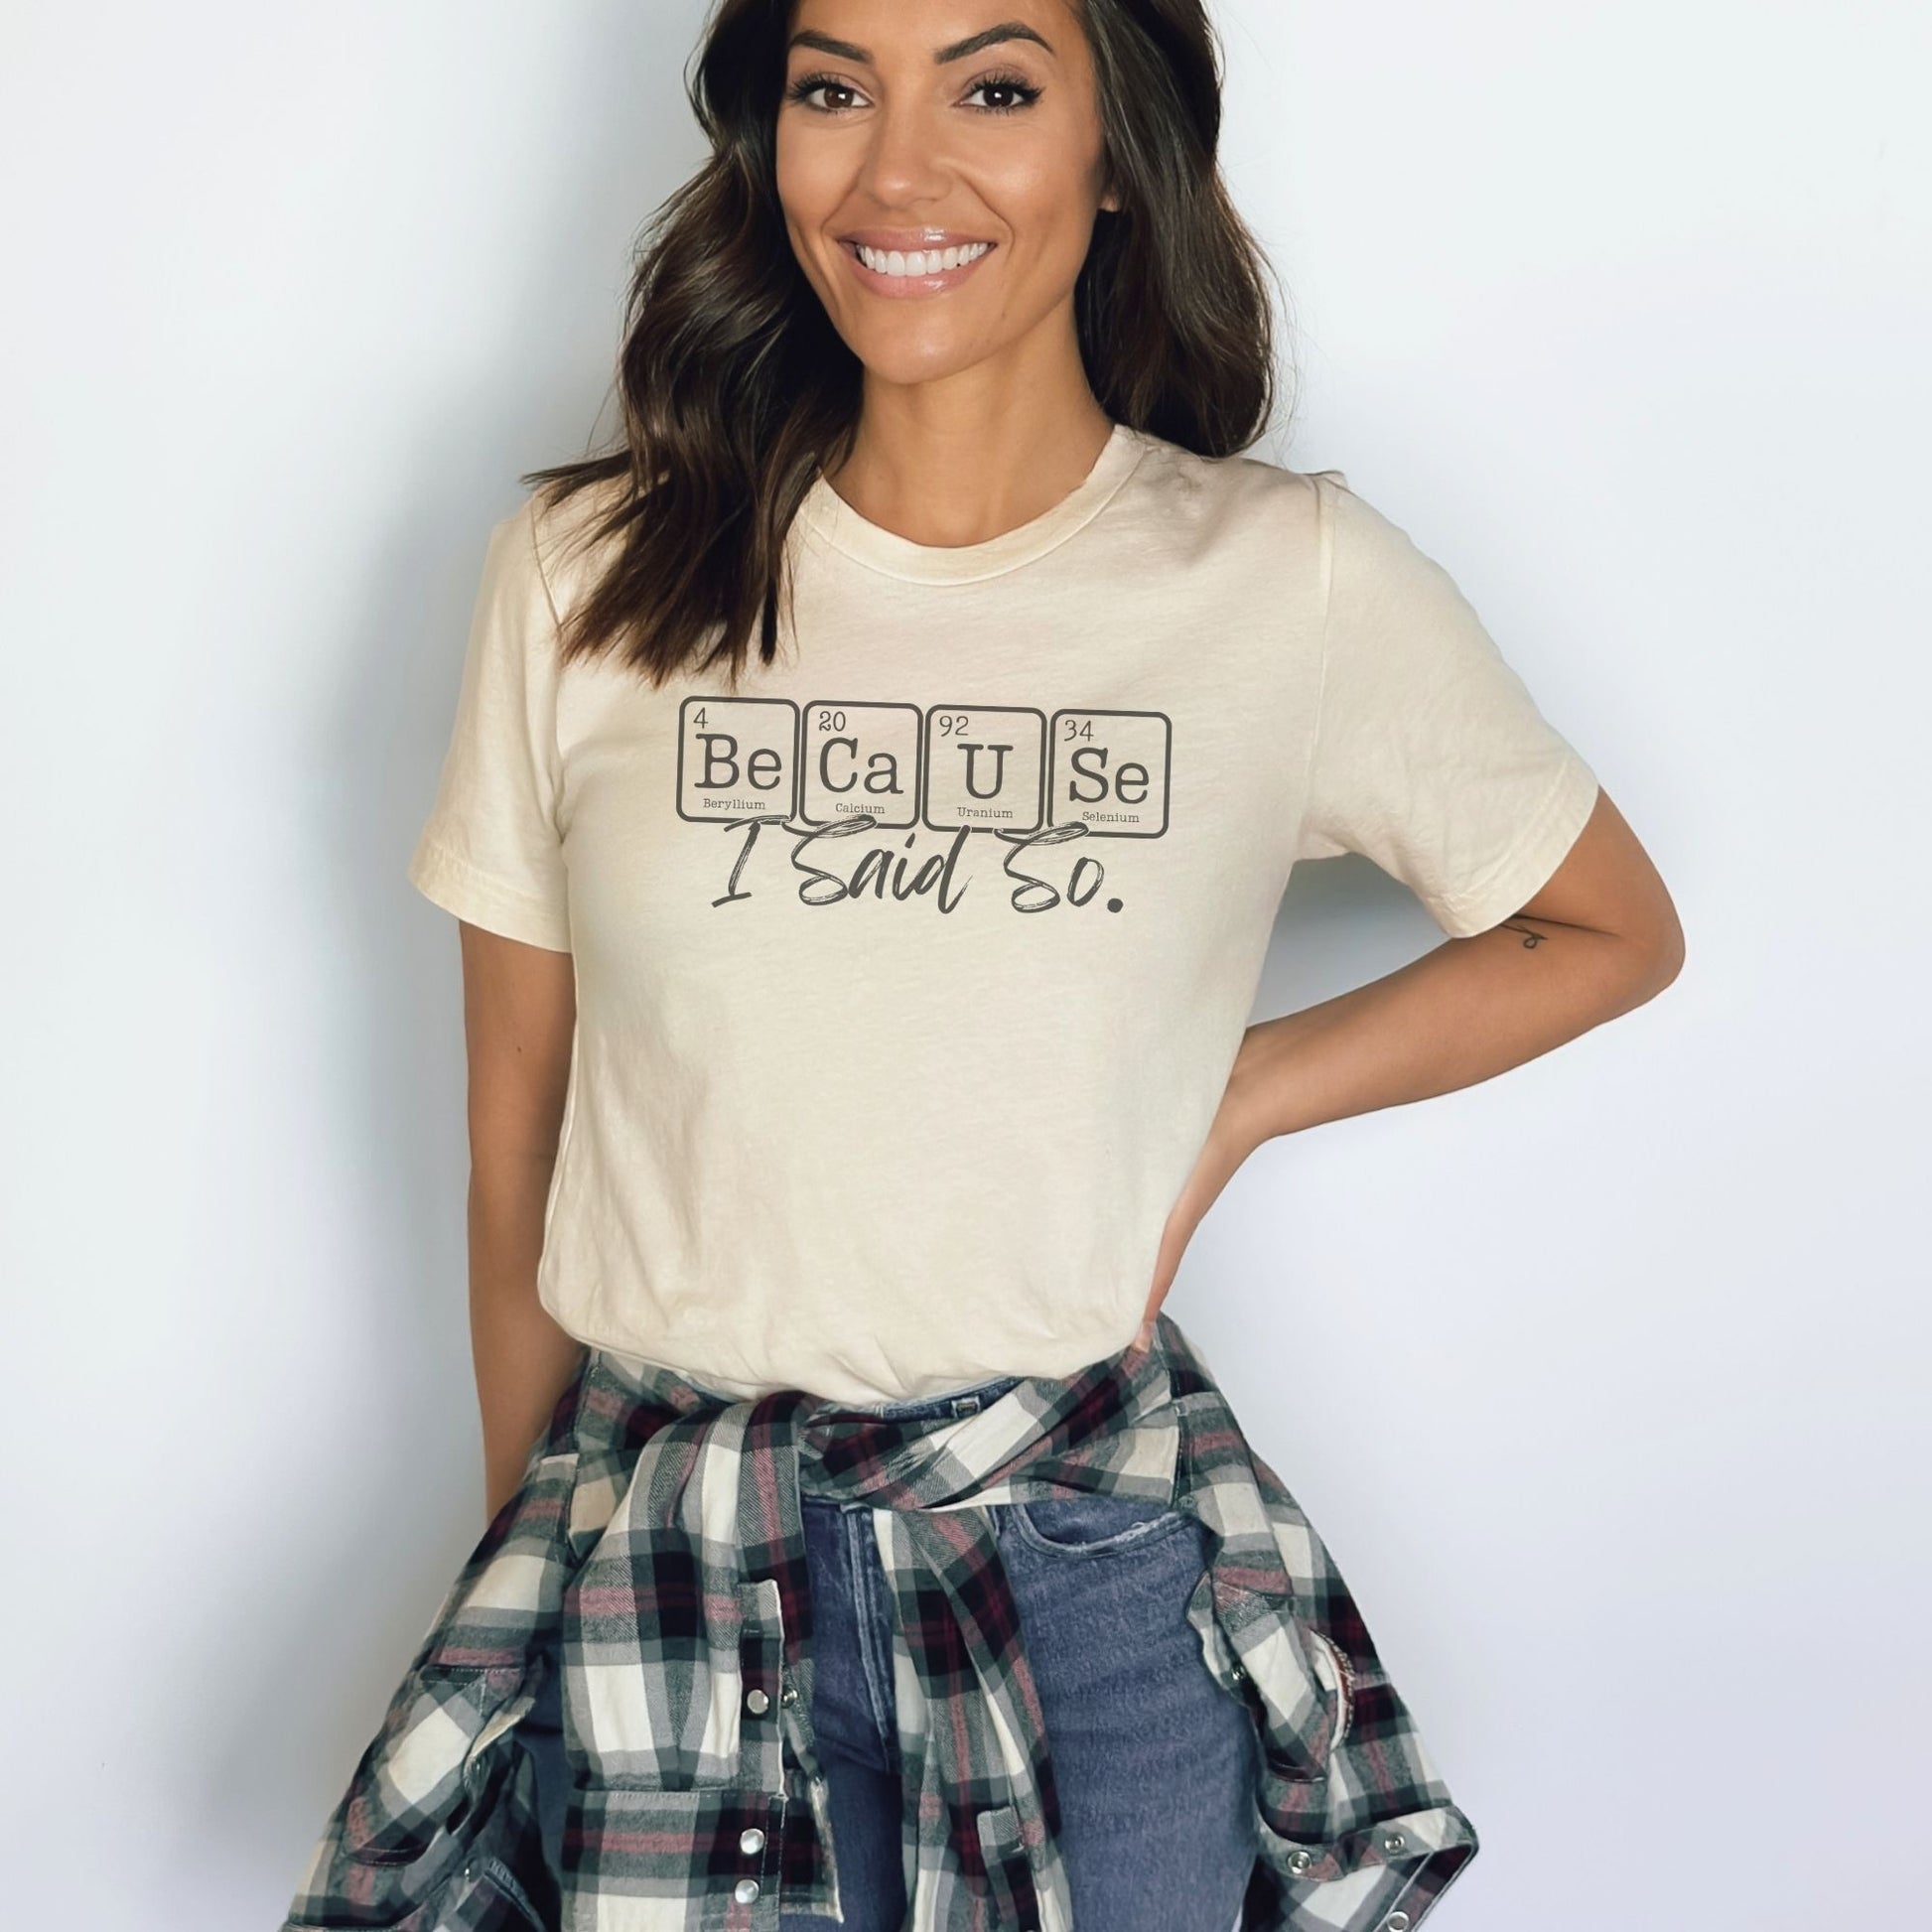 a woman wearing a t - shirt that says because i said so